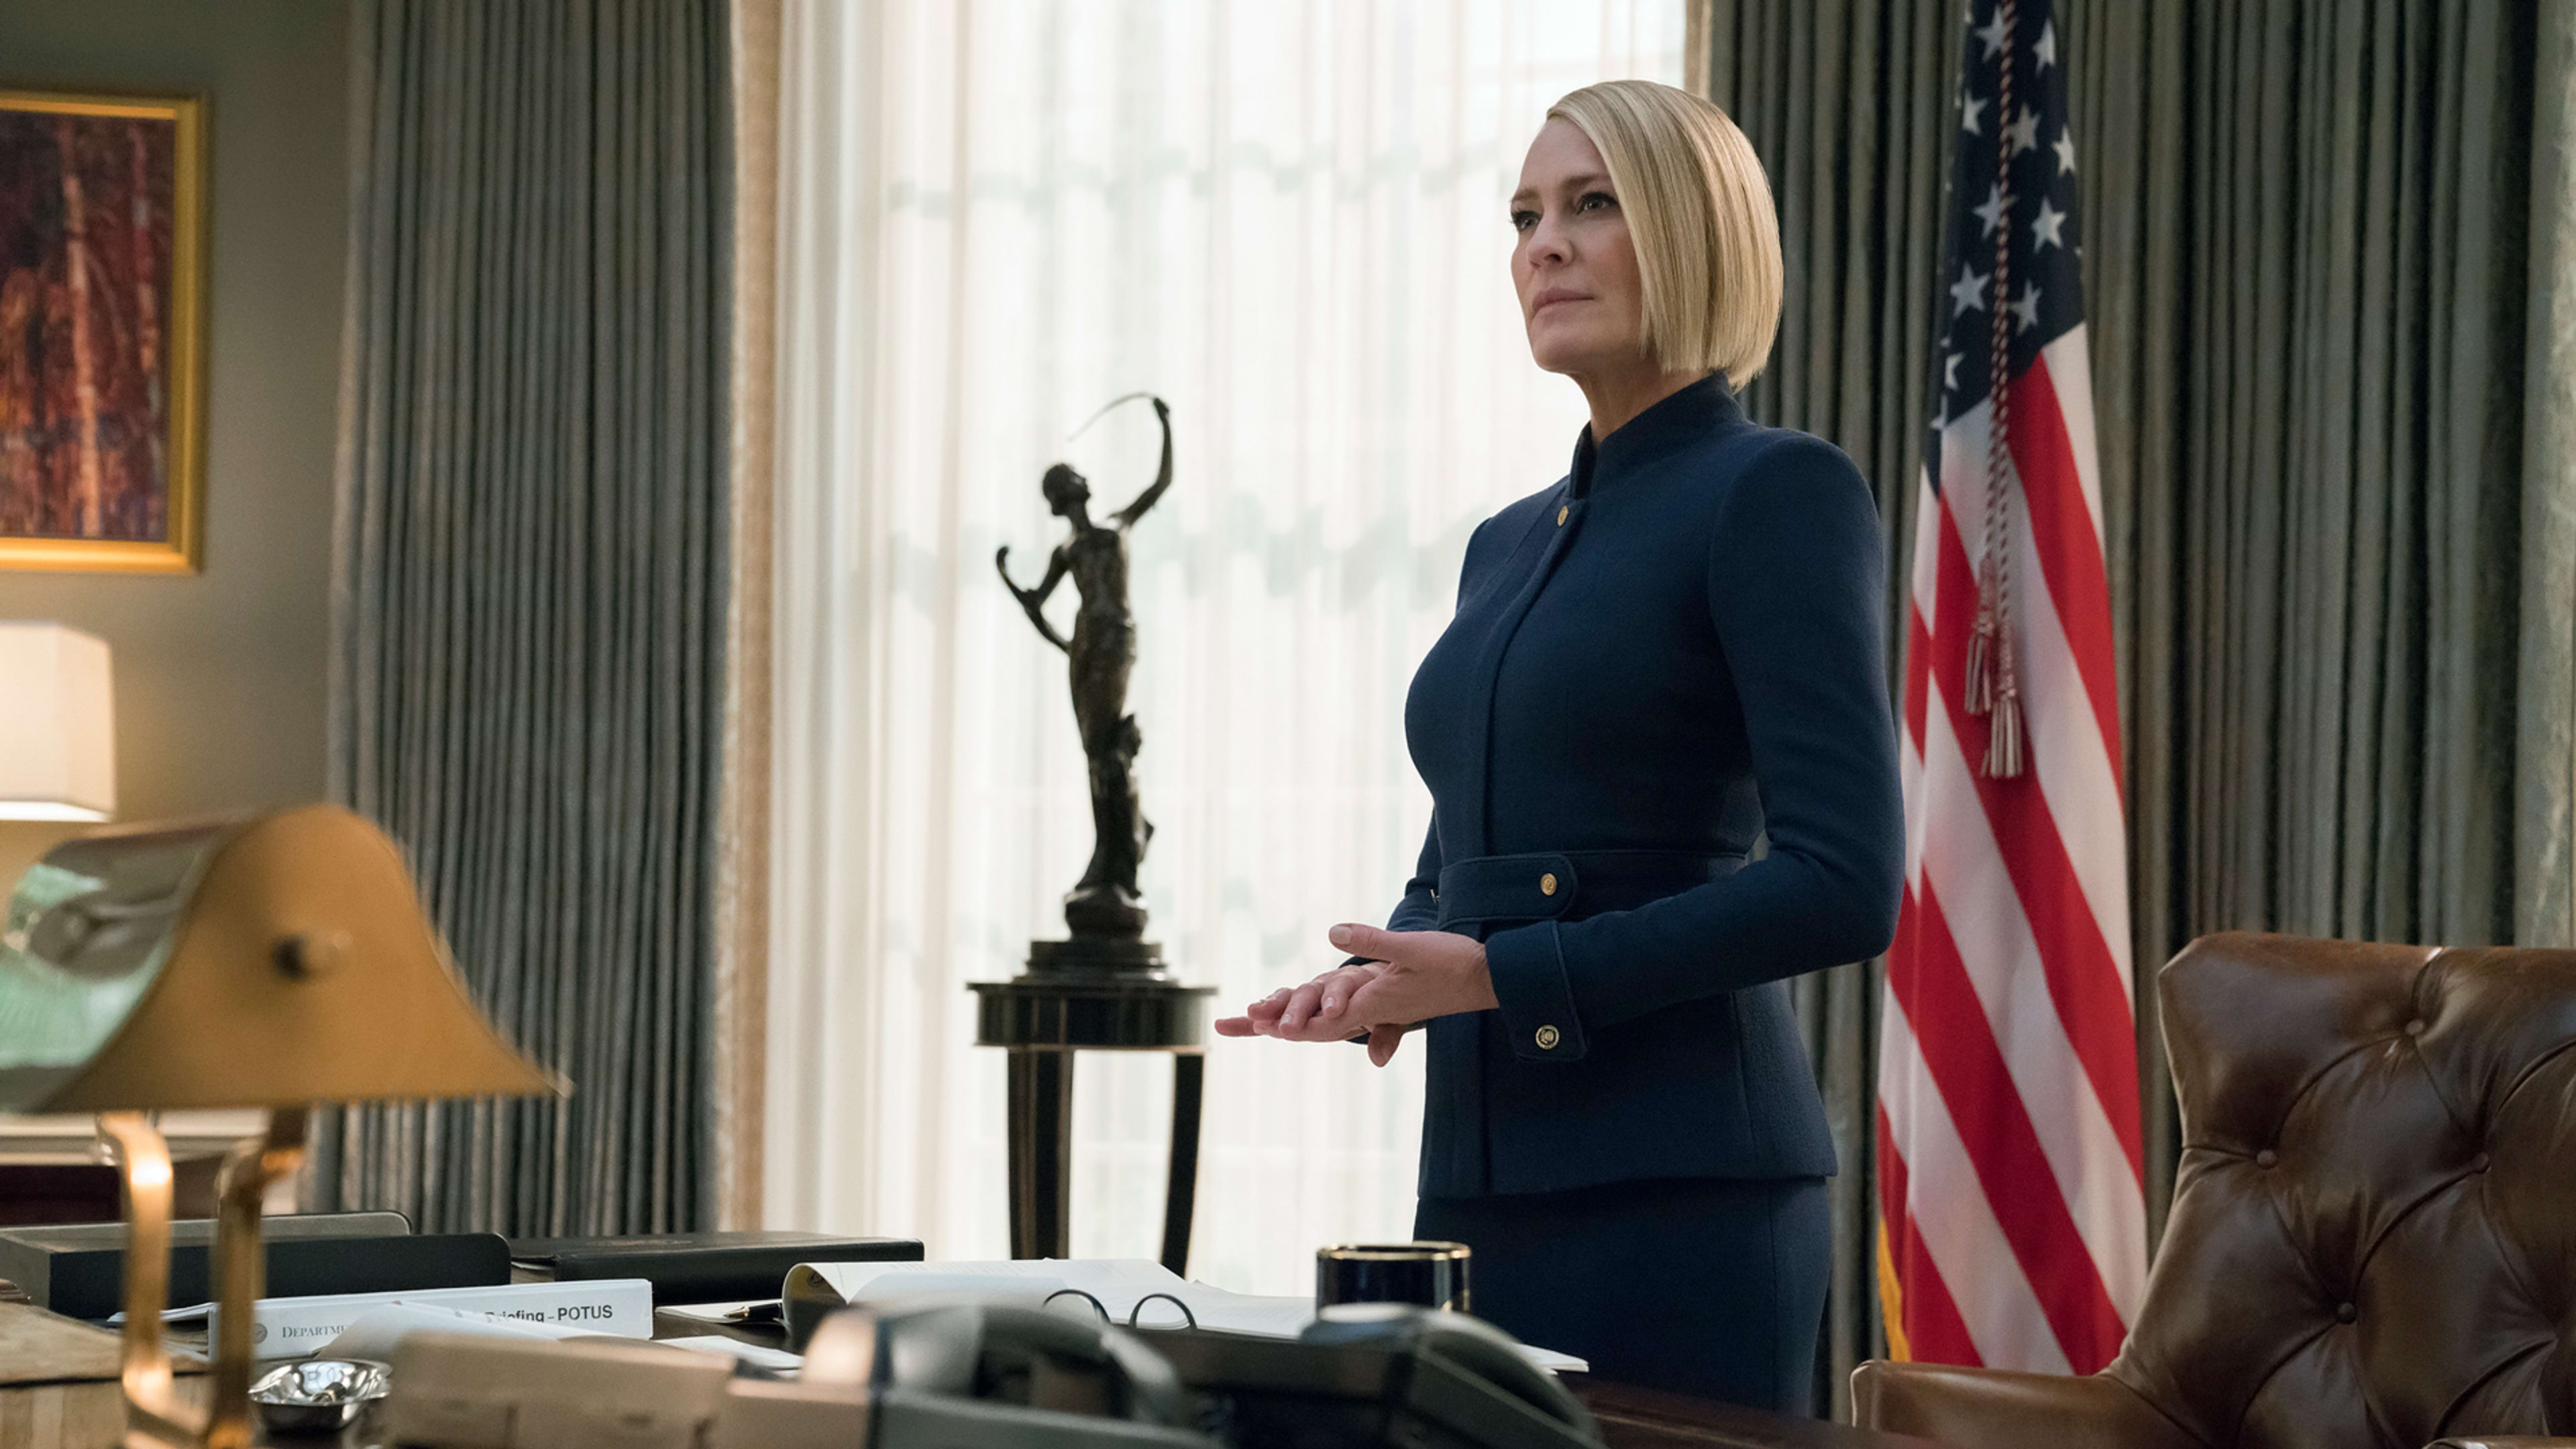 Final “House of Cards” season goes all in, borrows from our insanely awful reality